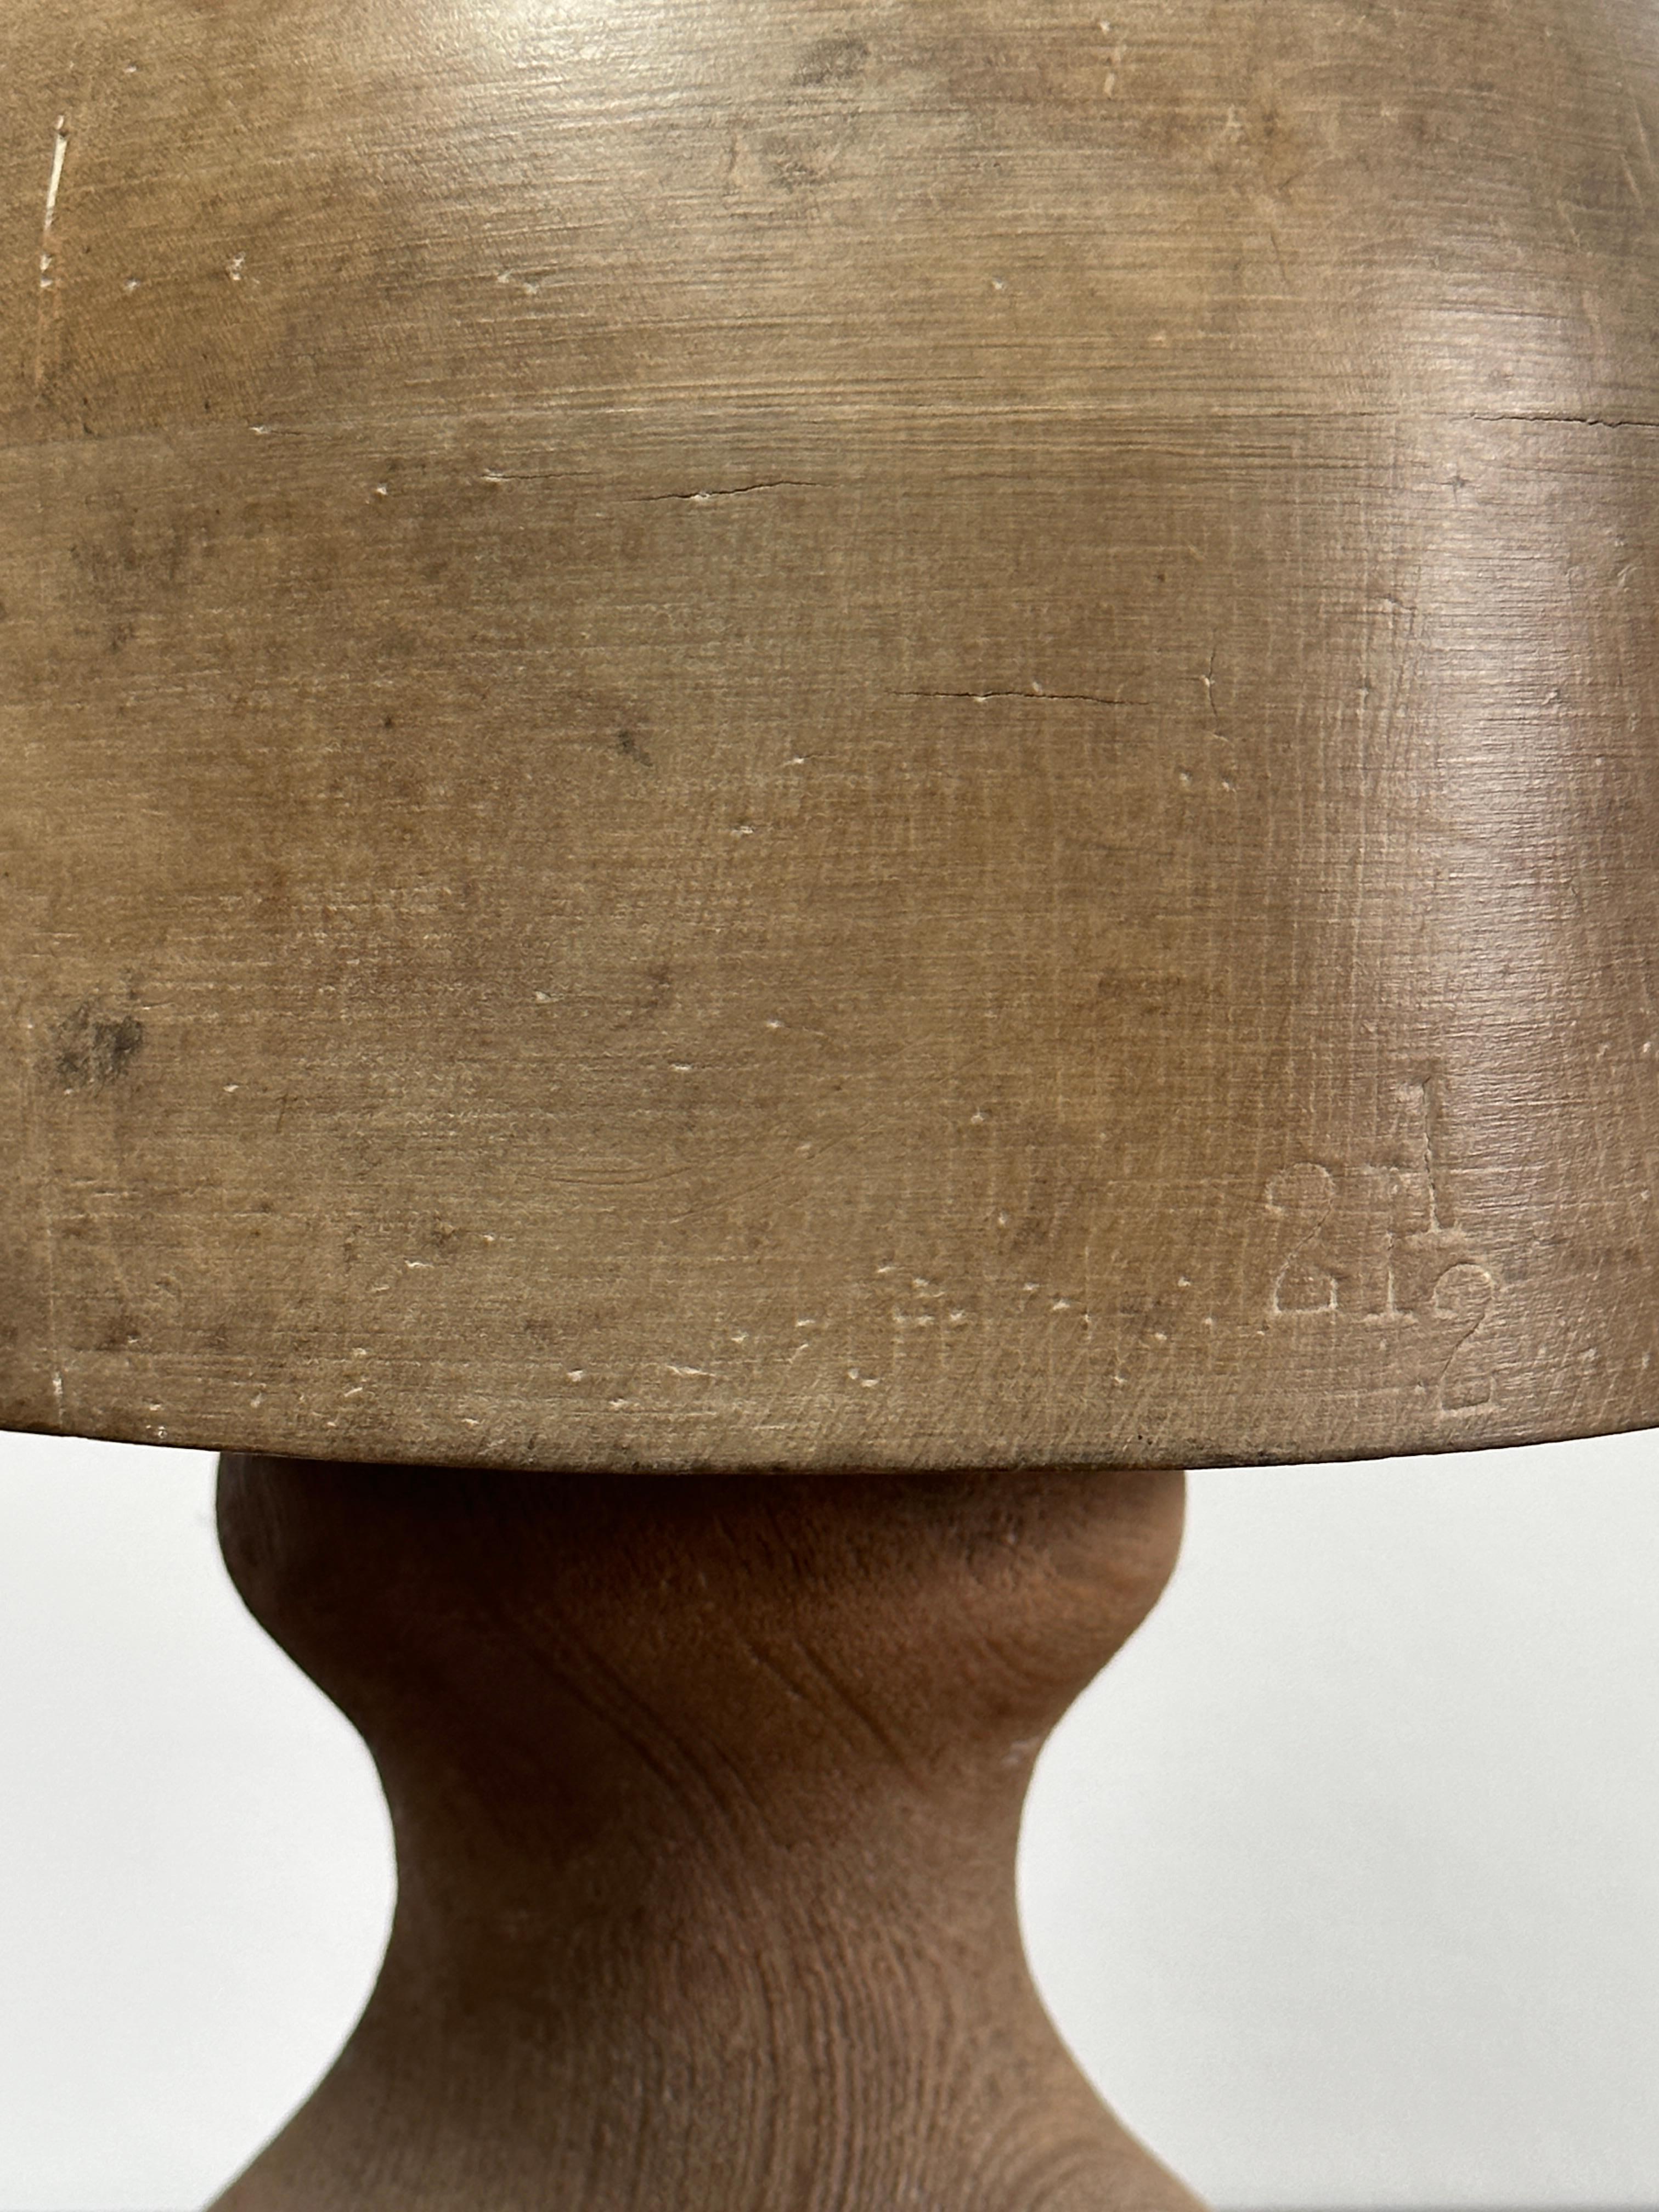 - An original vintage wooden round millinery hat block with removable stand, England Circa 1950.
- This block has been recently waxed and left in its natural colour, comes with its original removable stand.
-  Beautiful decorative piece which was